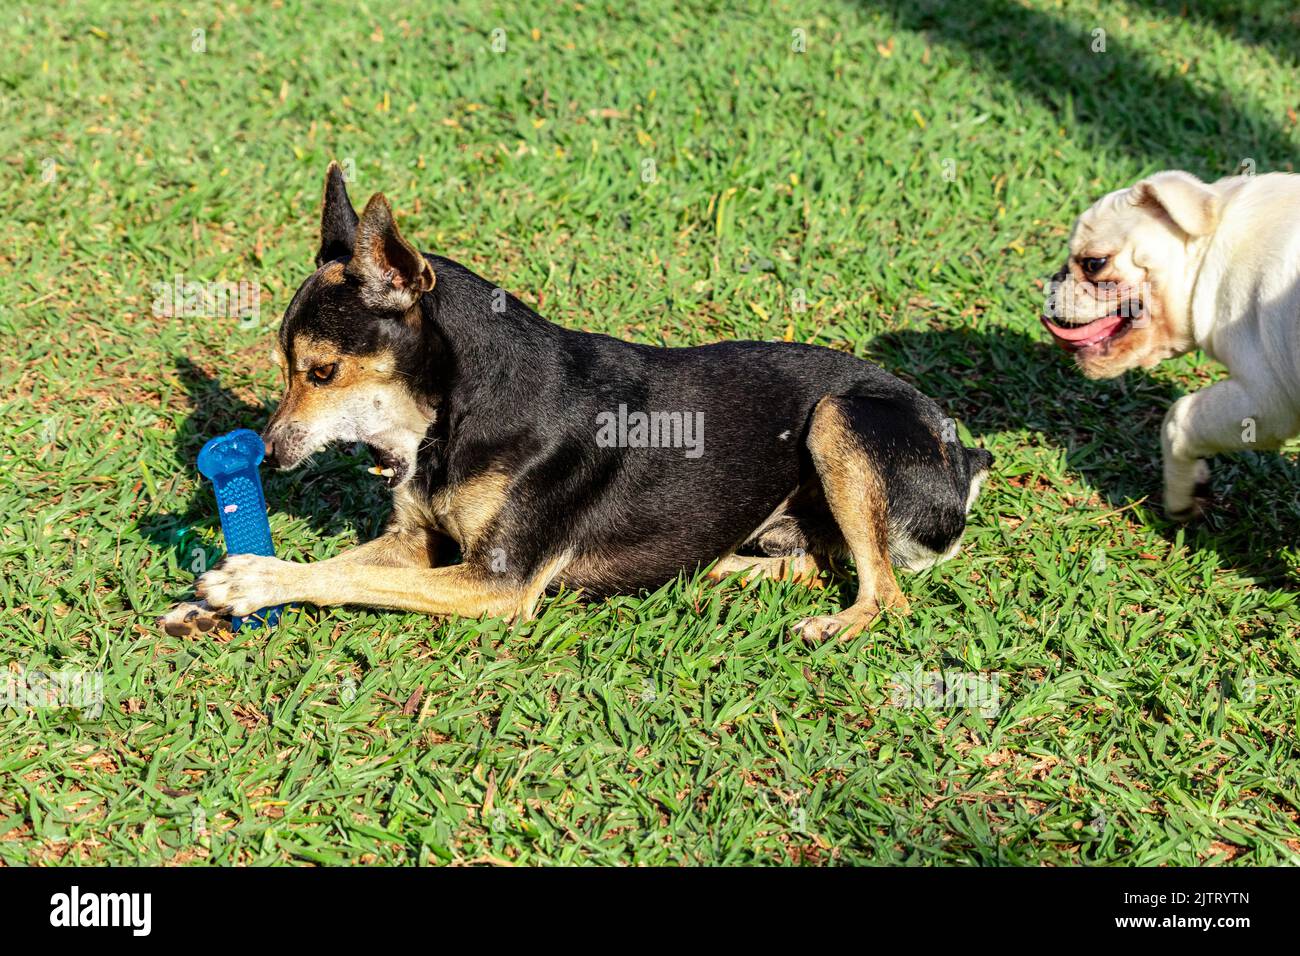 Pinscher and pug dog chasing each other on the grass, playing. Stock Photo